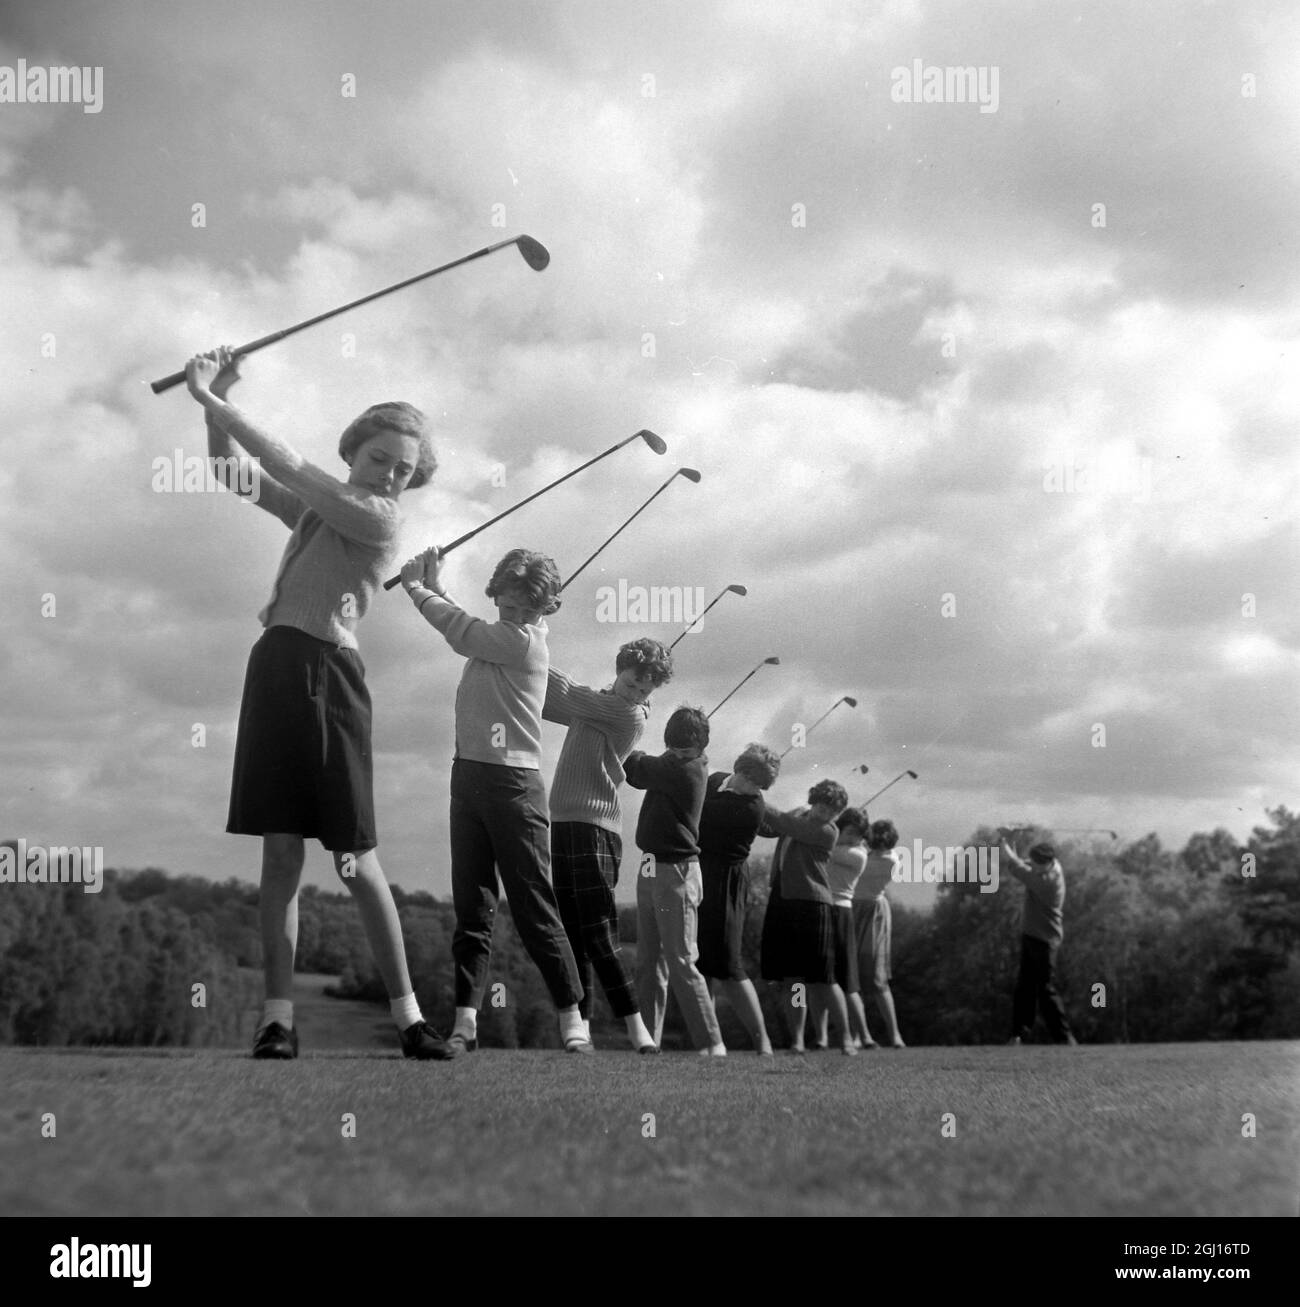 GOLF GIRLS PRACTICING A SWINGING DRIVER IN SOUTHAMPTON ; 11 MAY 1963 Stock Photo